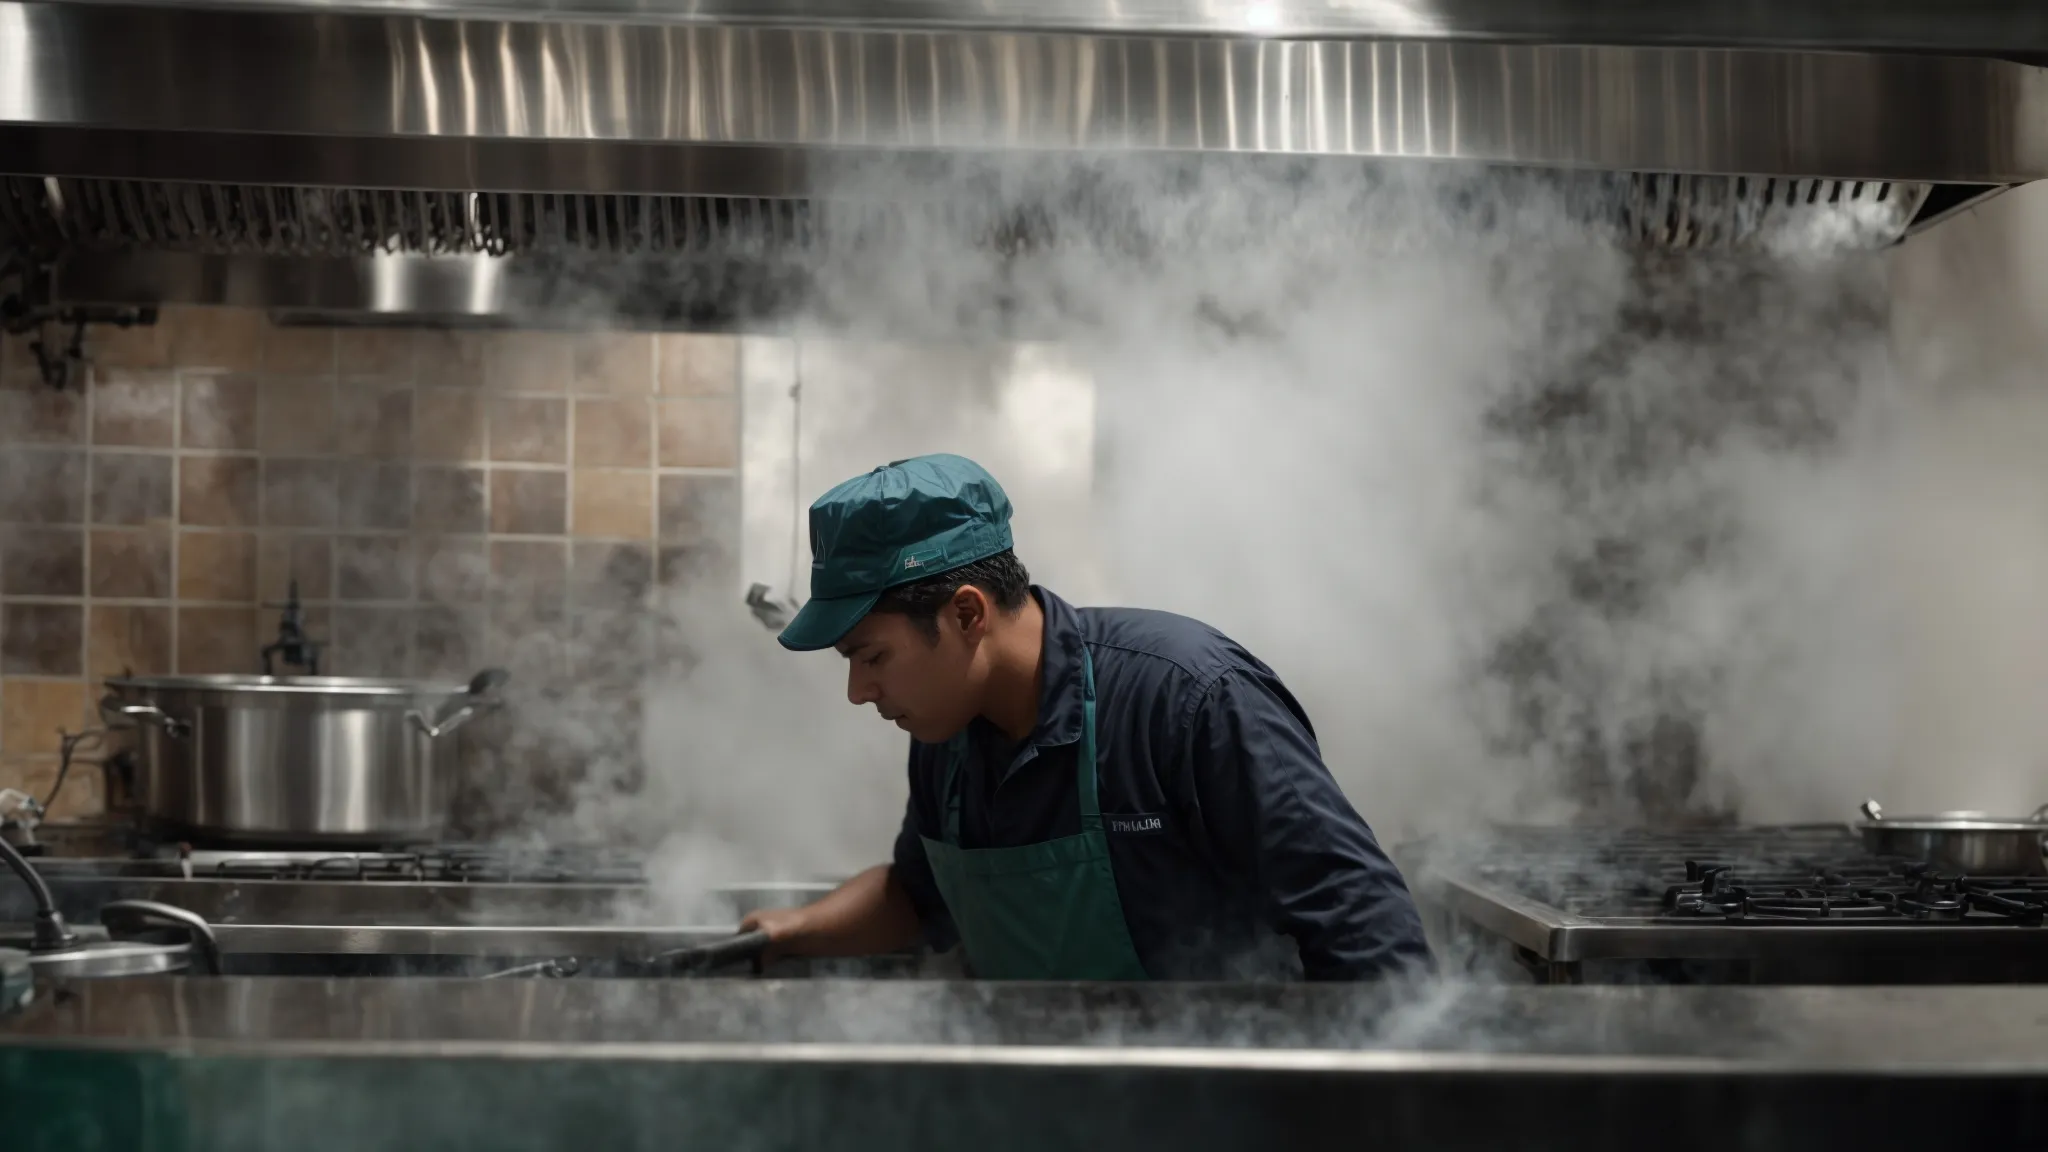 a professional cleaner power-washes the interior of a commercial kitchen hood, steam rising as grime is removed.